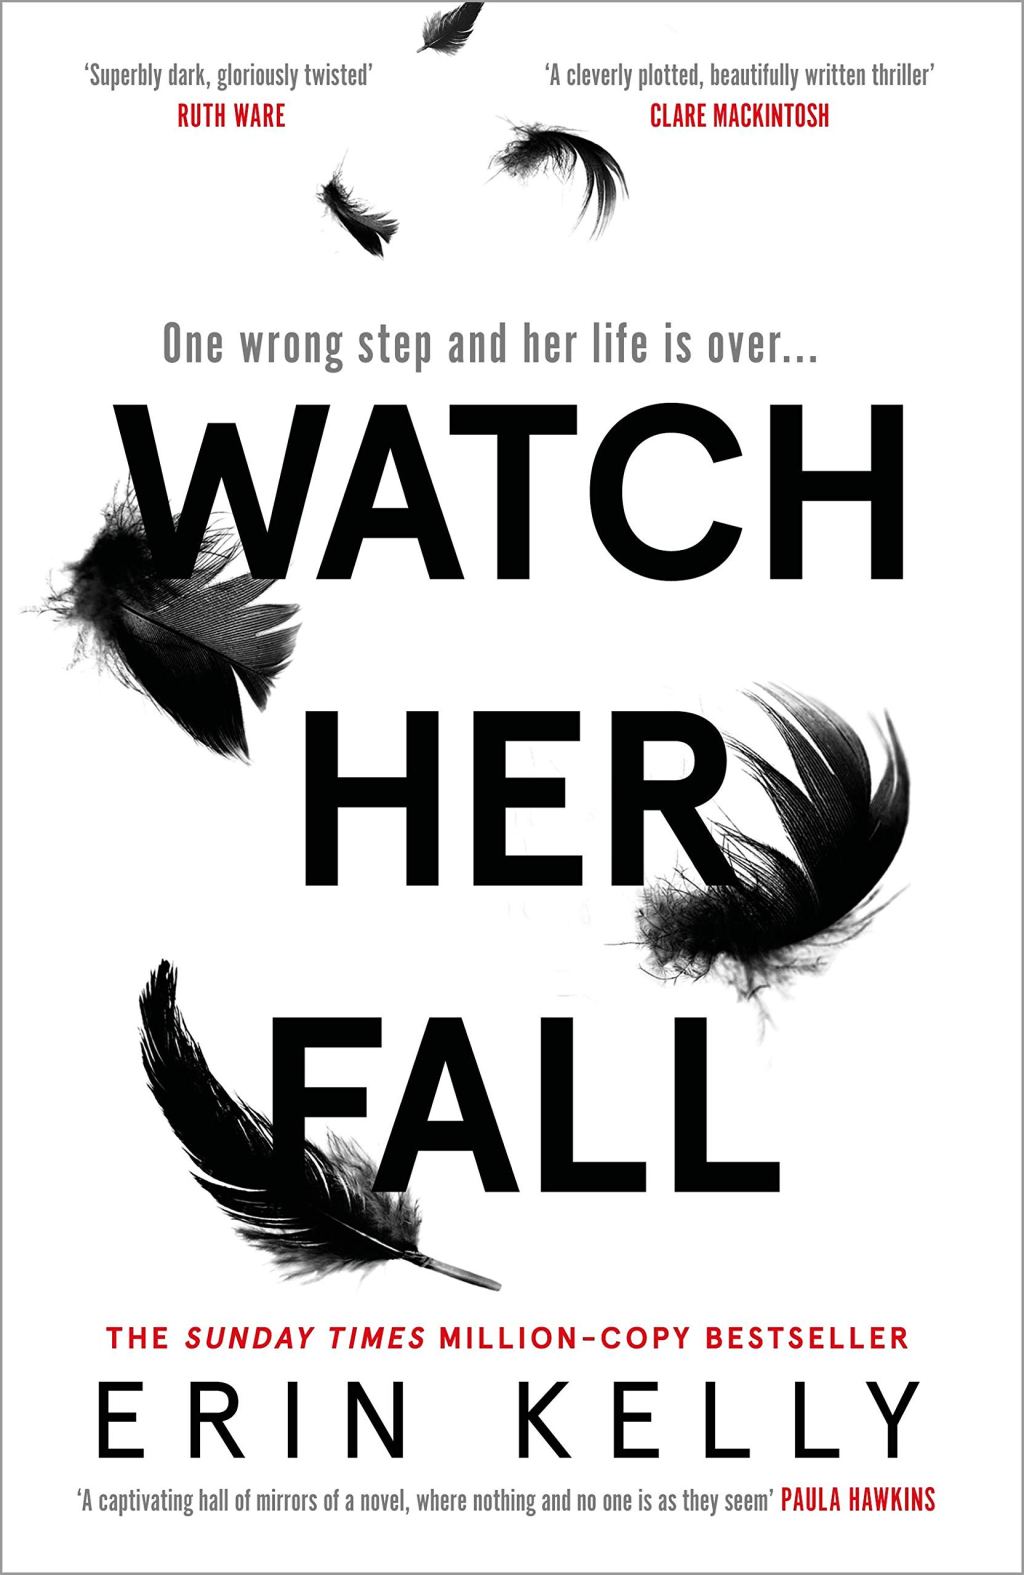 Watch Her Fall by Erin Kelly is out now (Hodder & Stoughton, £14.99)